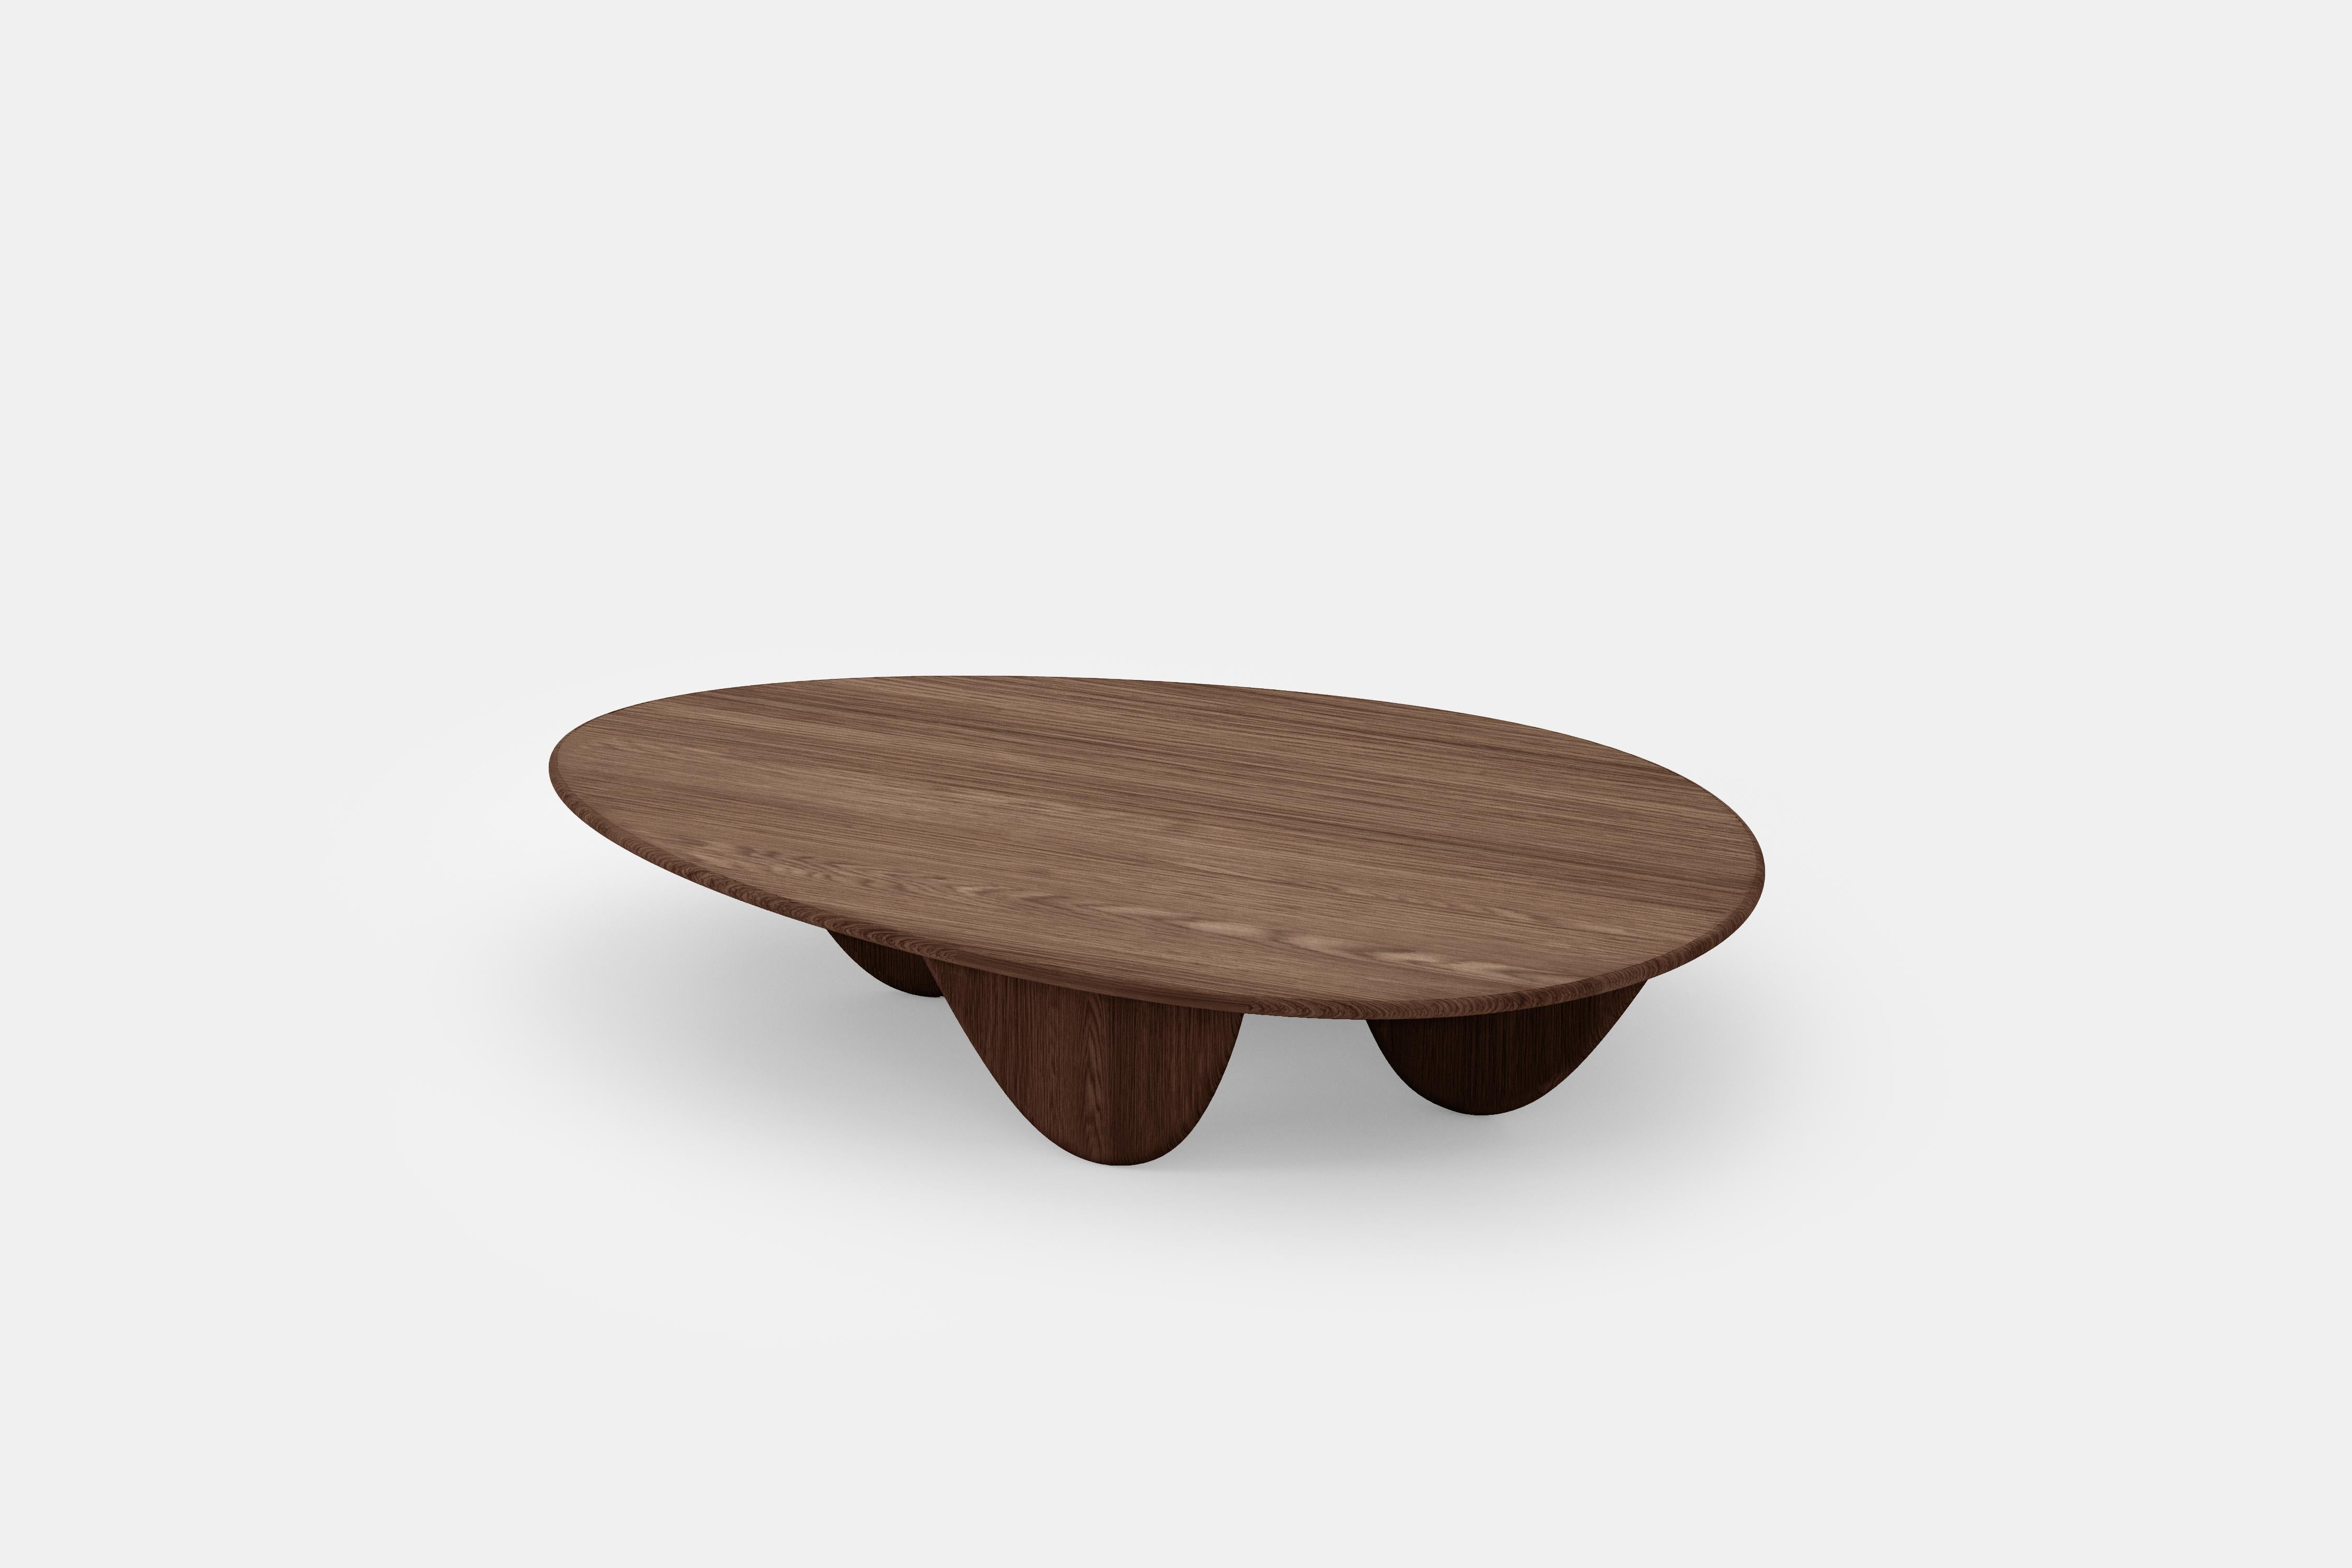 Noviembre X Big Coffee Table in Oak Wood, Coffee Table by Joel Escalona

The Noviembre collection is inspired by the creative values of Constantin Brancusi, a Romanian sculptor considered one of the most influential artists of the twentieth